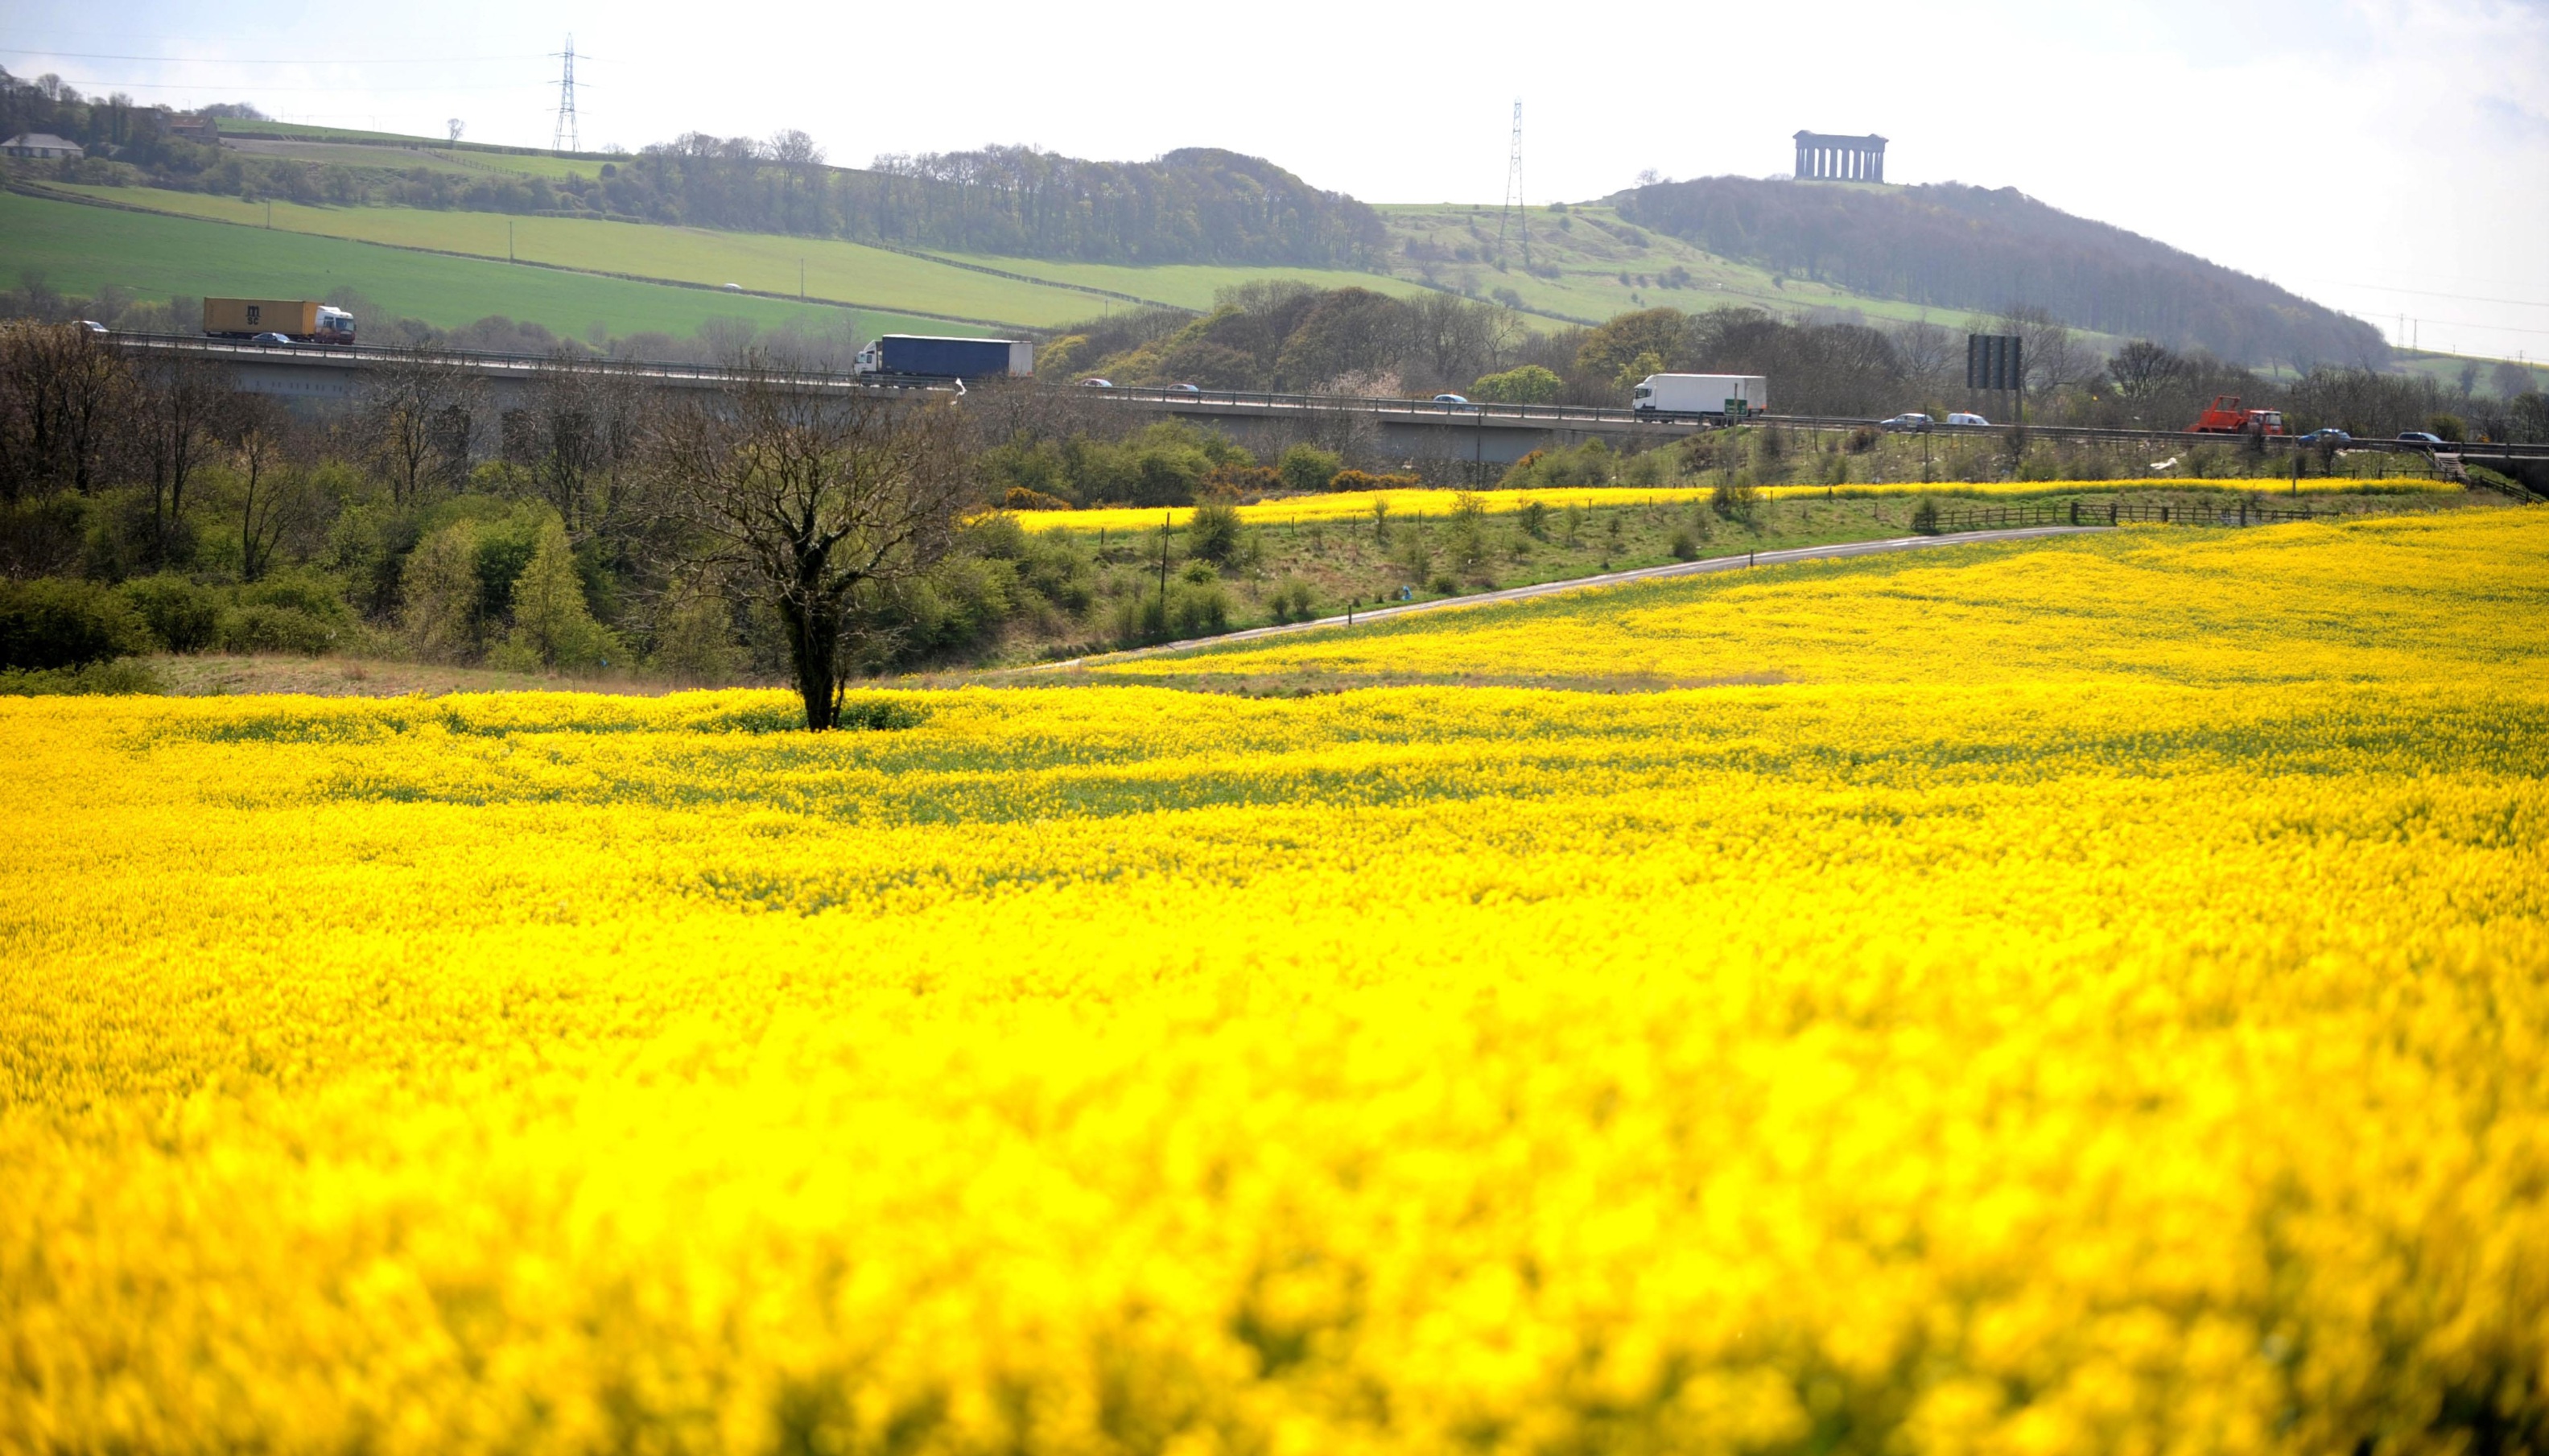 Metaldehyde is widely used on oilseed rape, potato and cereal crops.